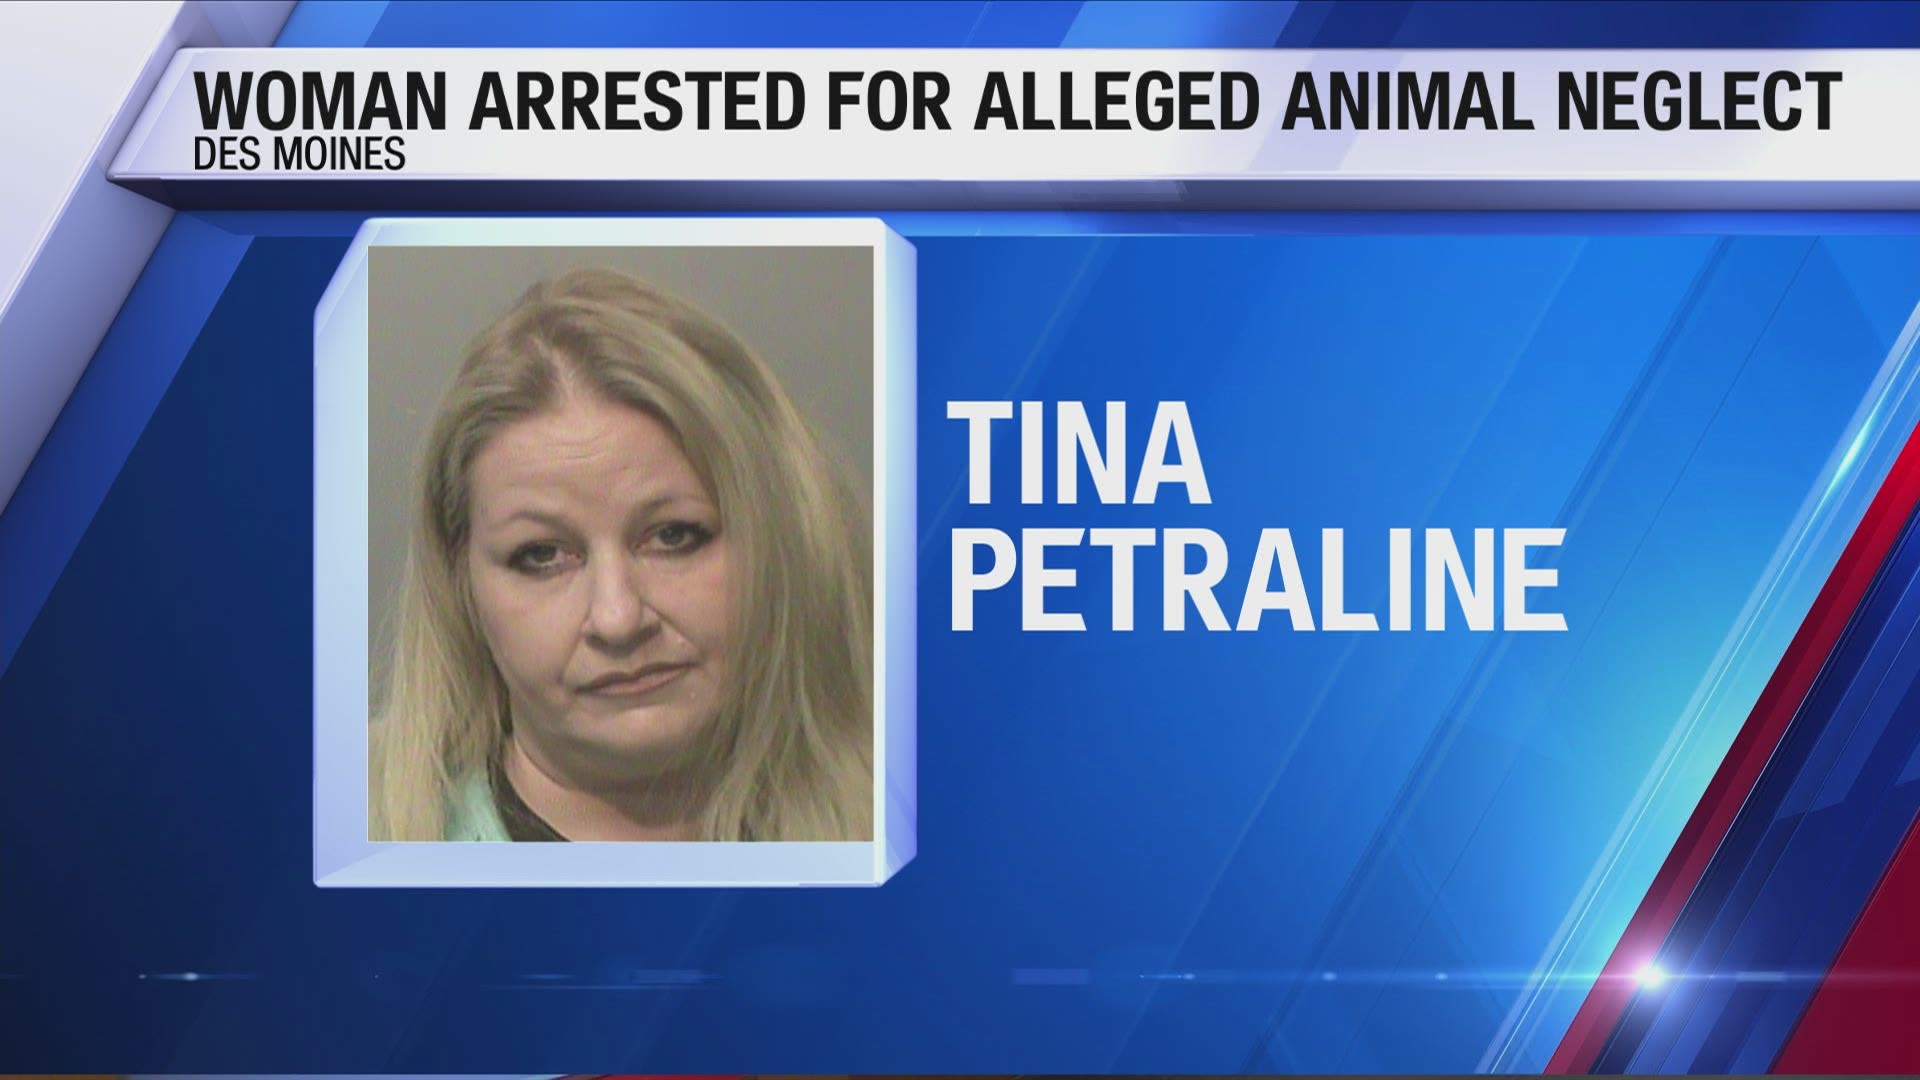 Des Moines woman arrested on various animal neglect charges